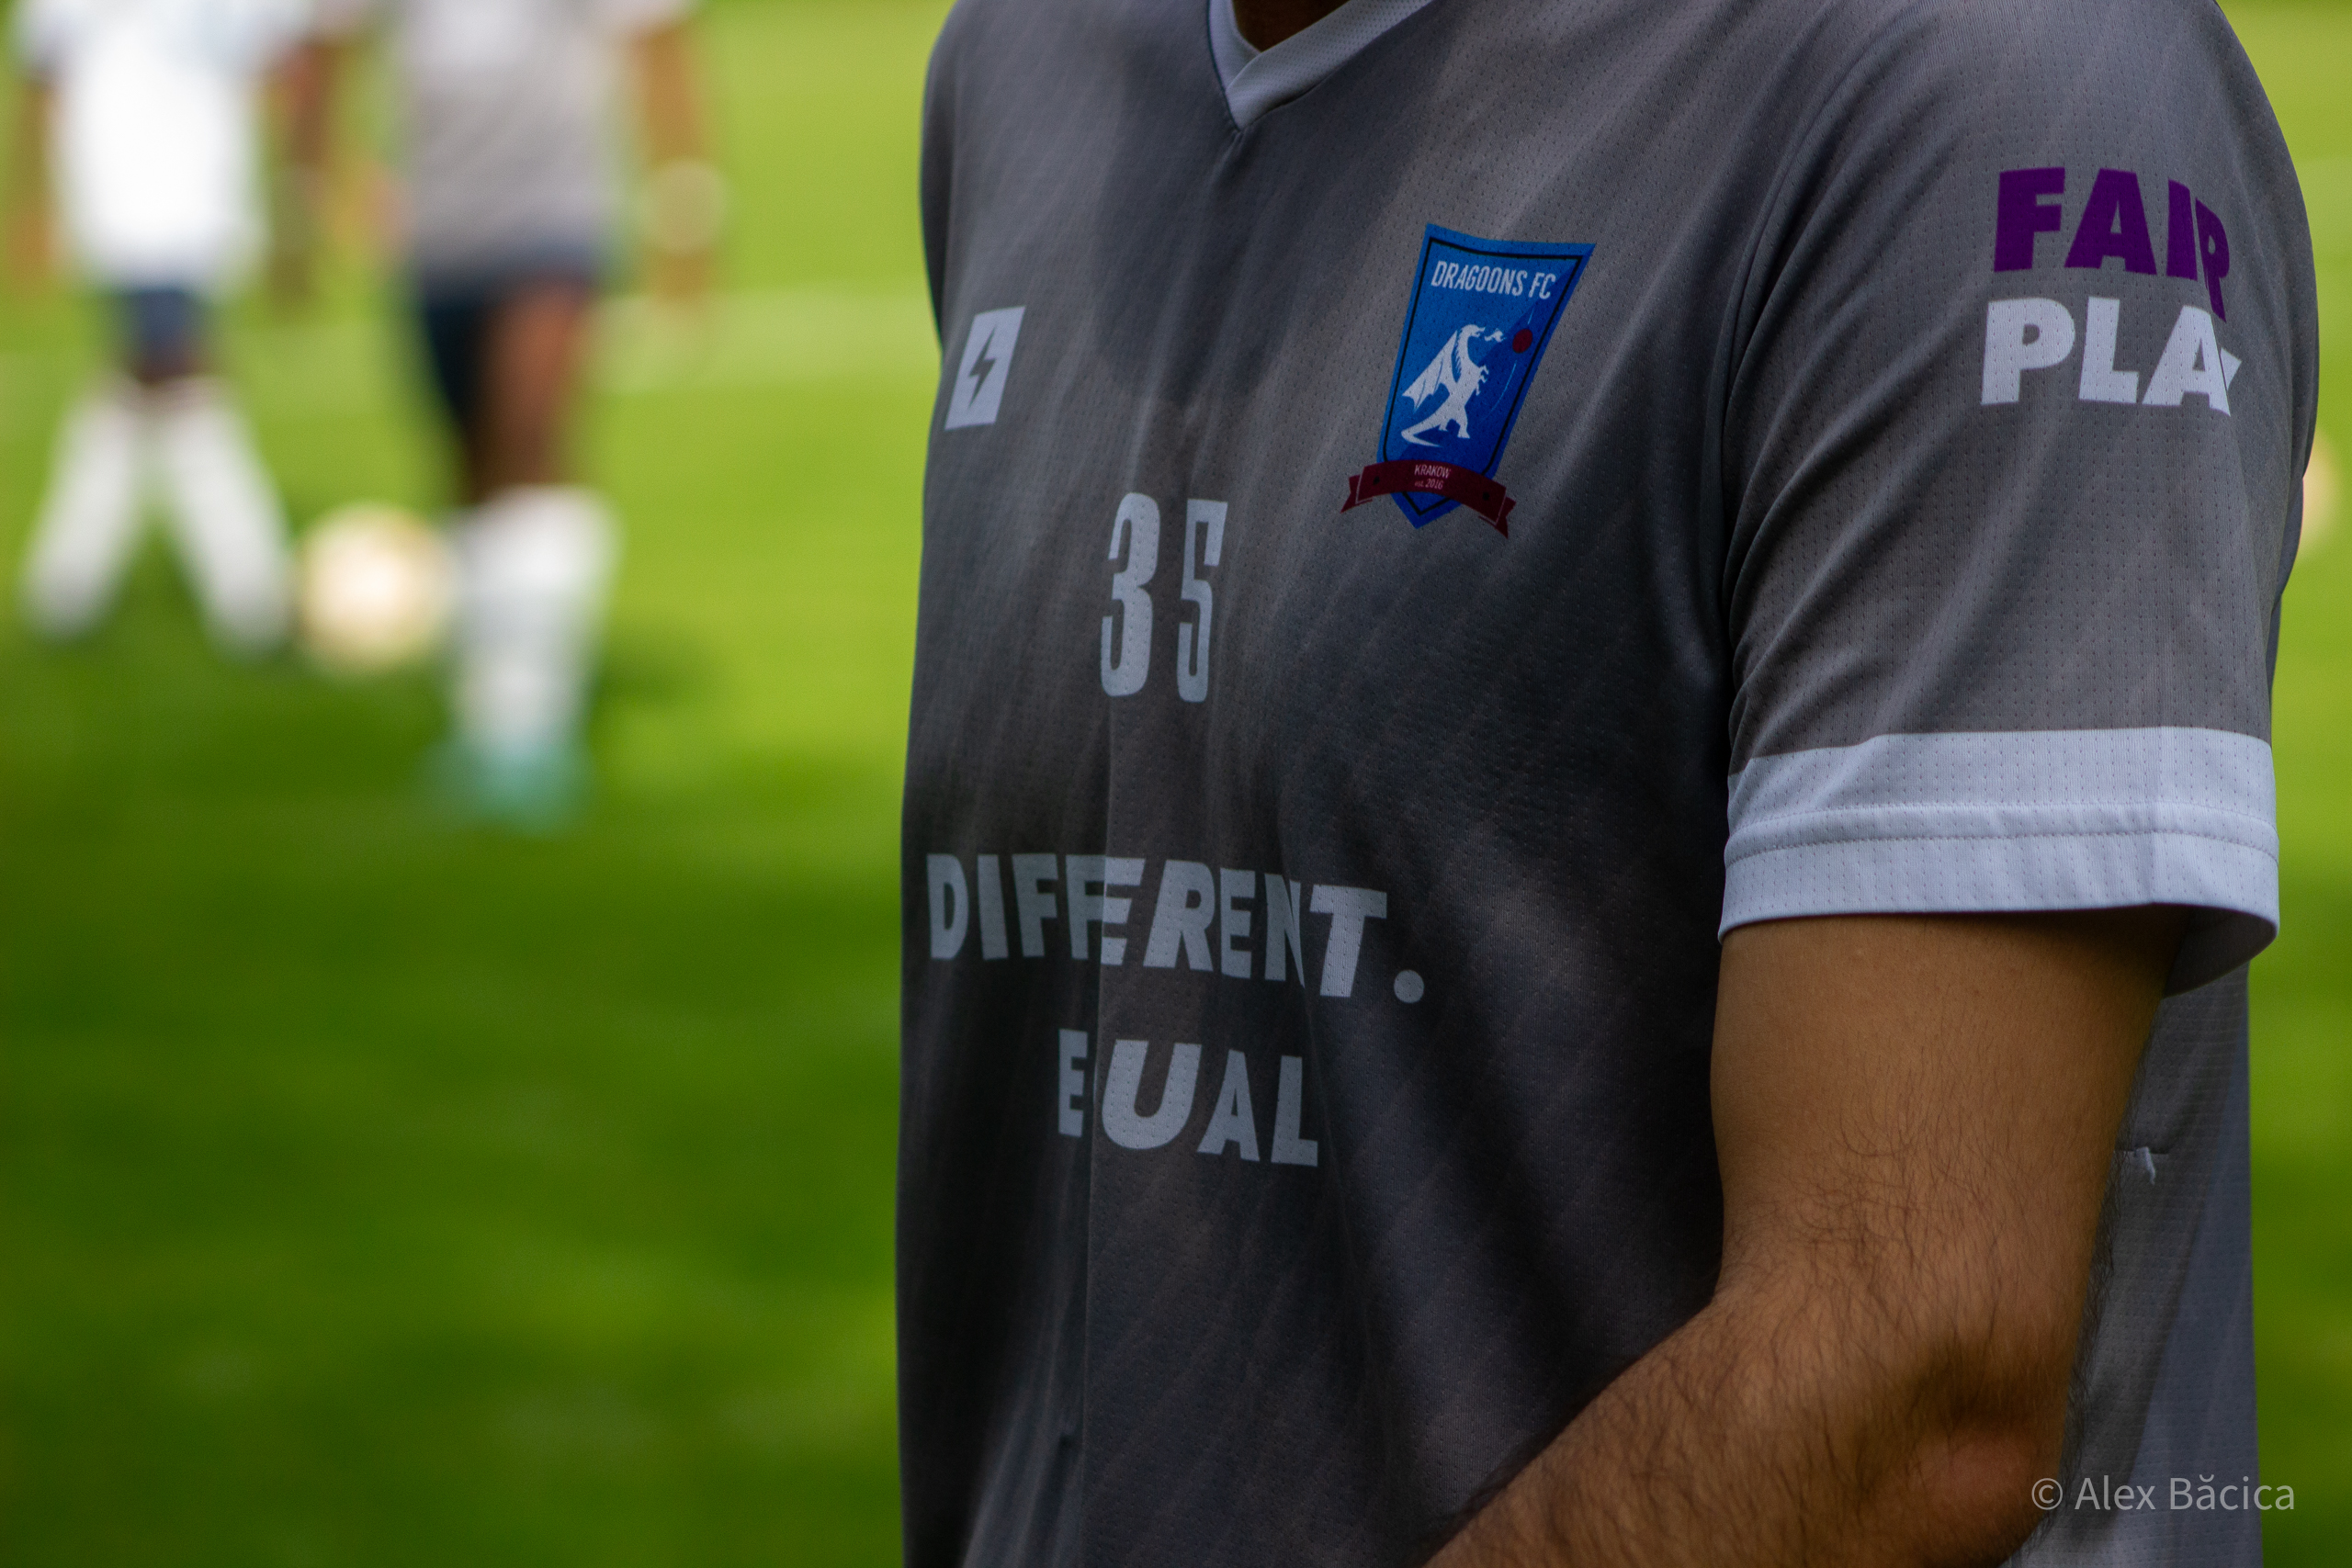 A Krakow Dragoons FC player wearing the "Different. Equal" training jersey